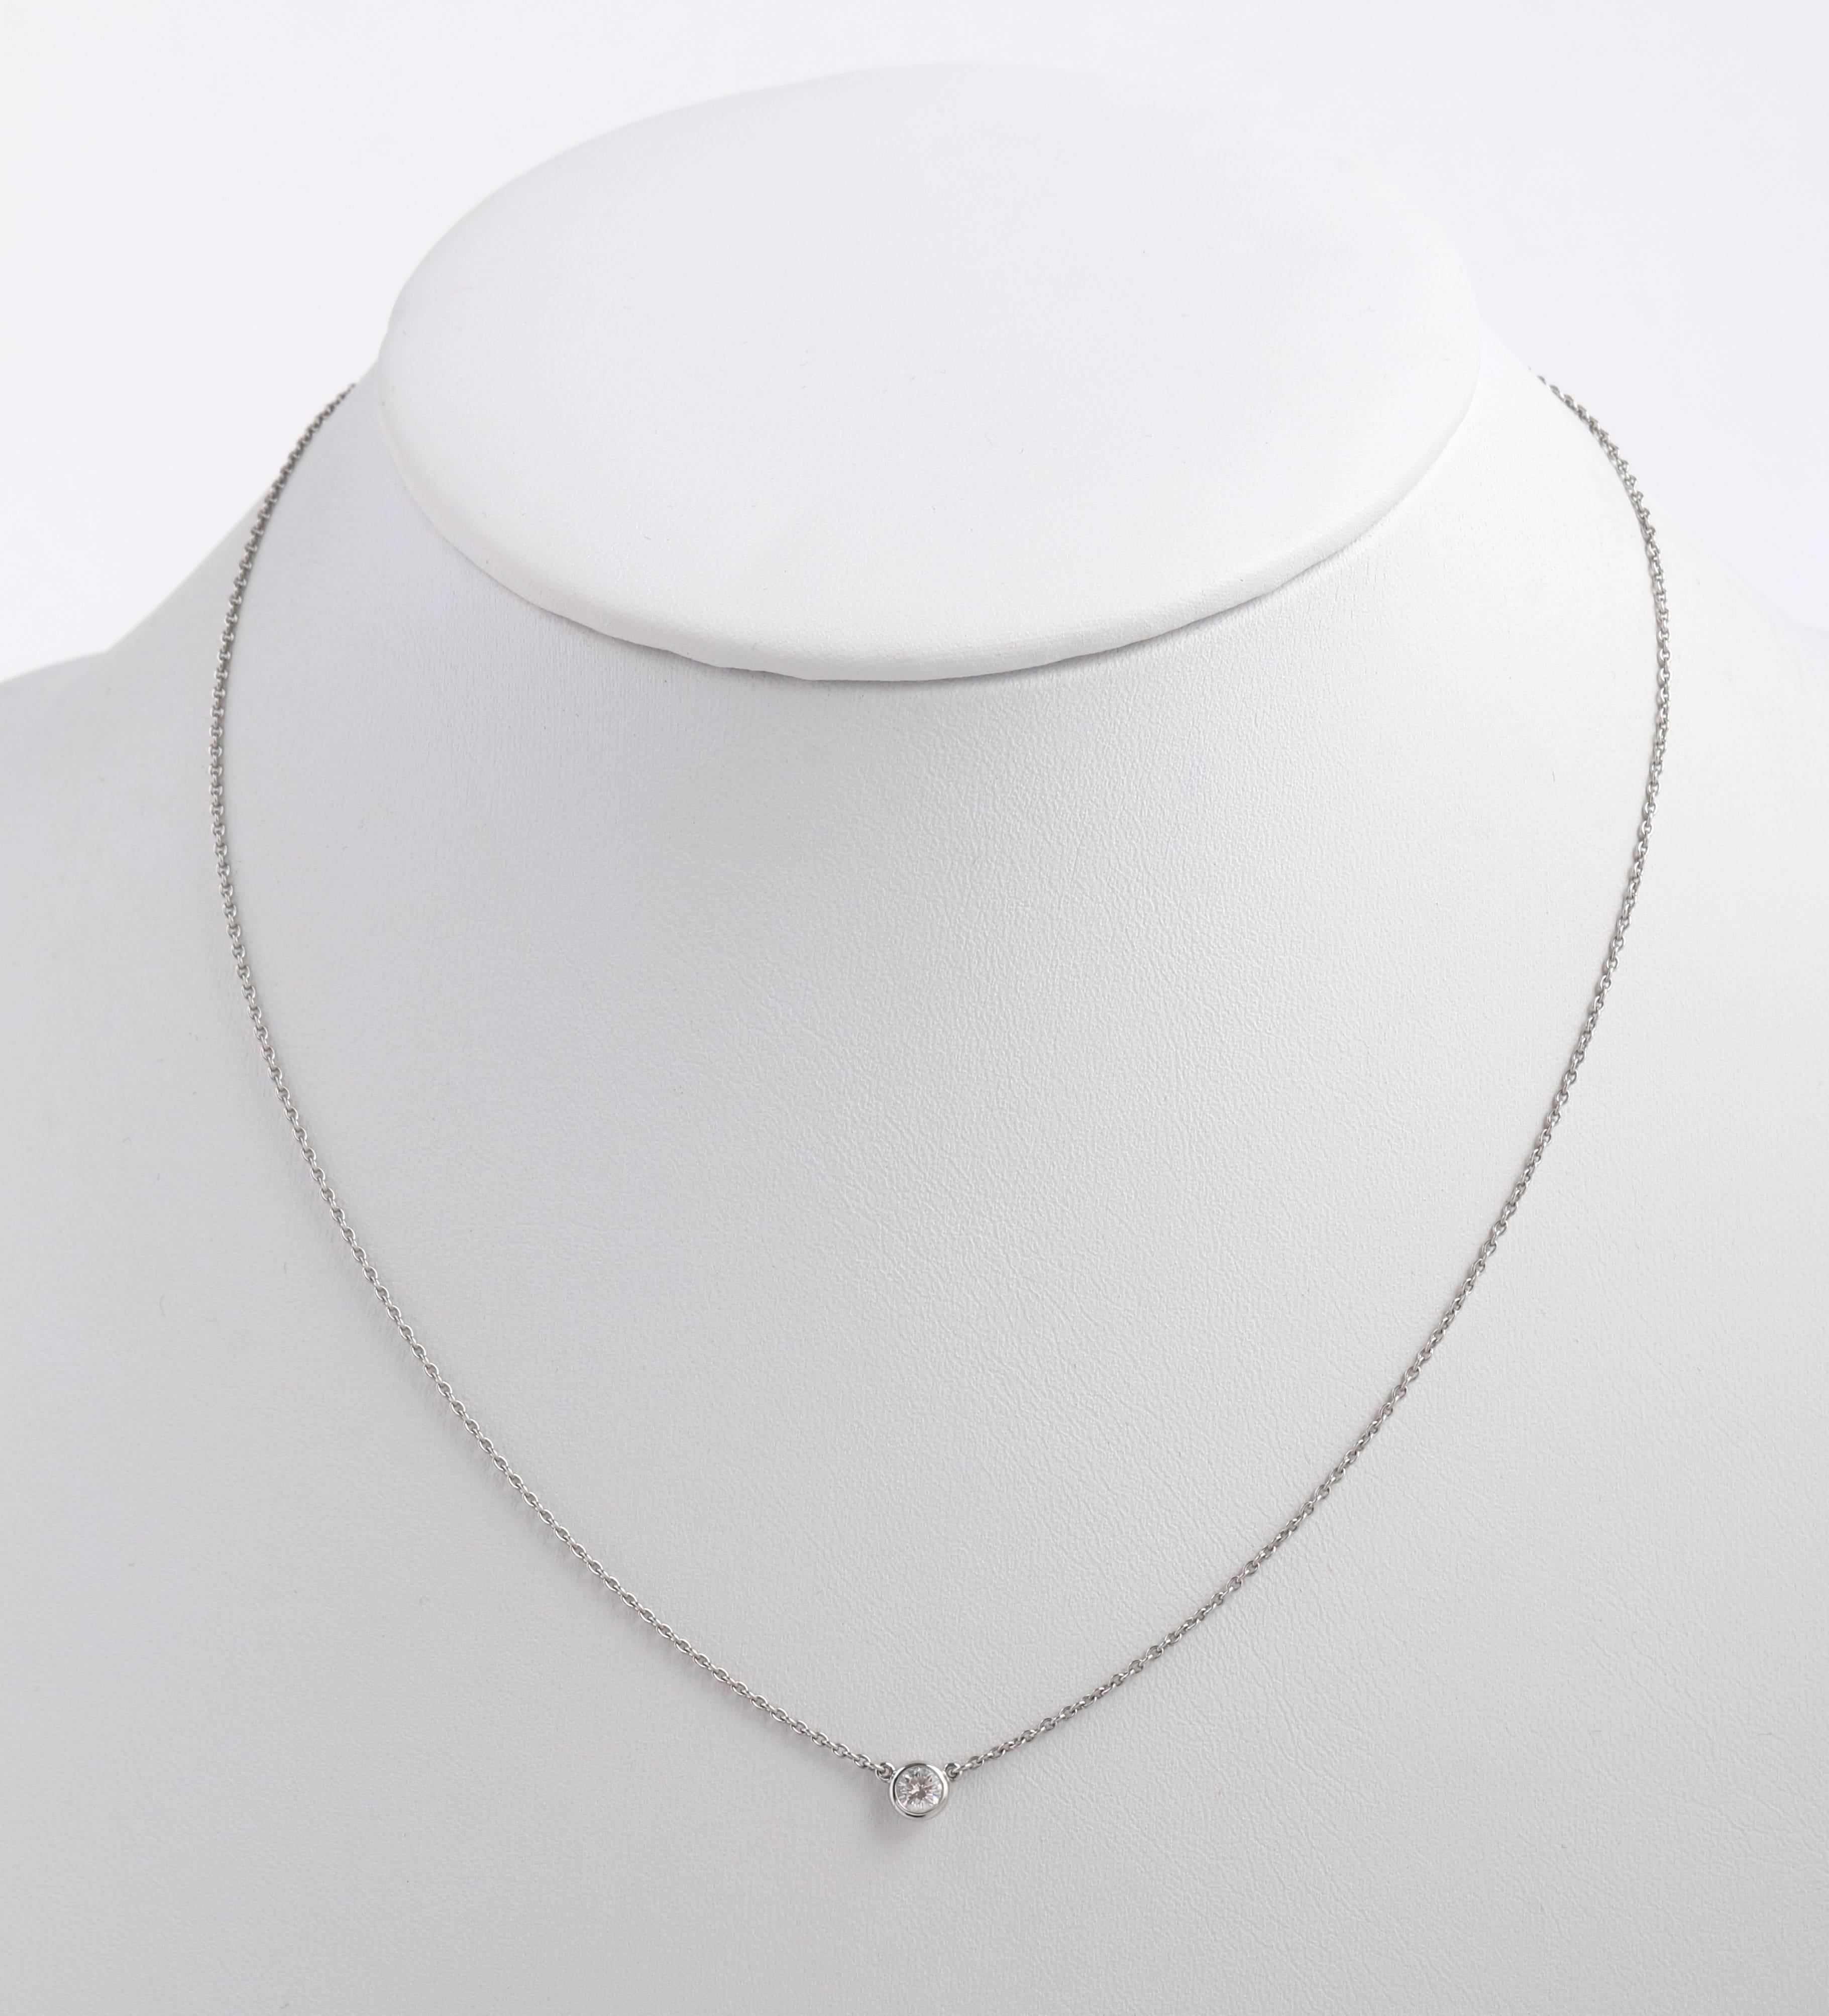 Tiffany & Co Elsa Peretti “Diamonds by the Yard” platinum necklace and earring set. Platinum cable chain (approximately measuring 16.5” L, including clasp) with round bezel set diamond (approximately measuring 2.5mm). Carat weight 0.05ct . Stamped